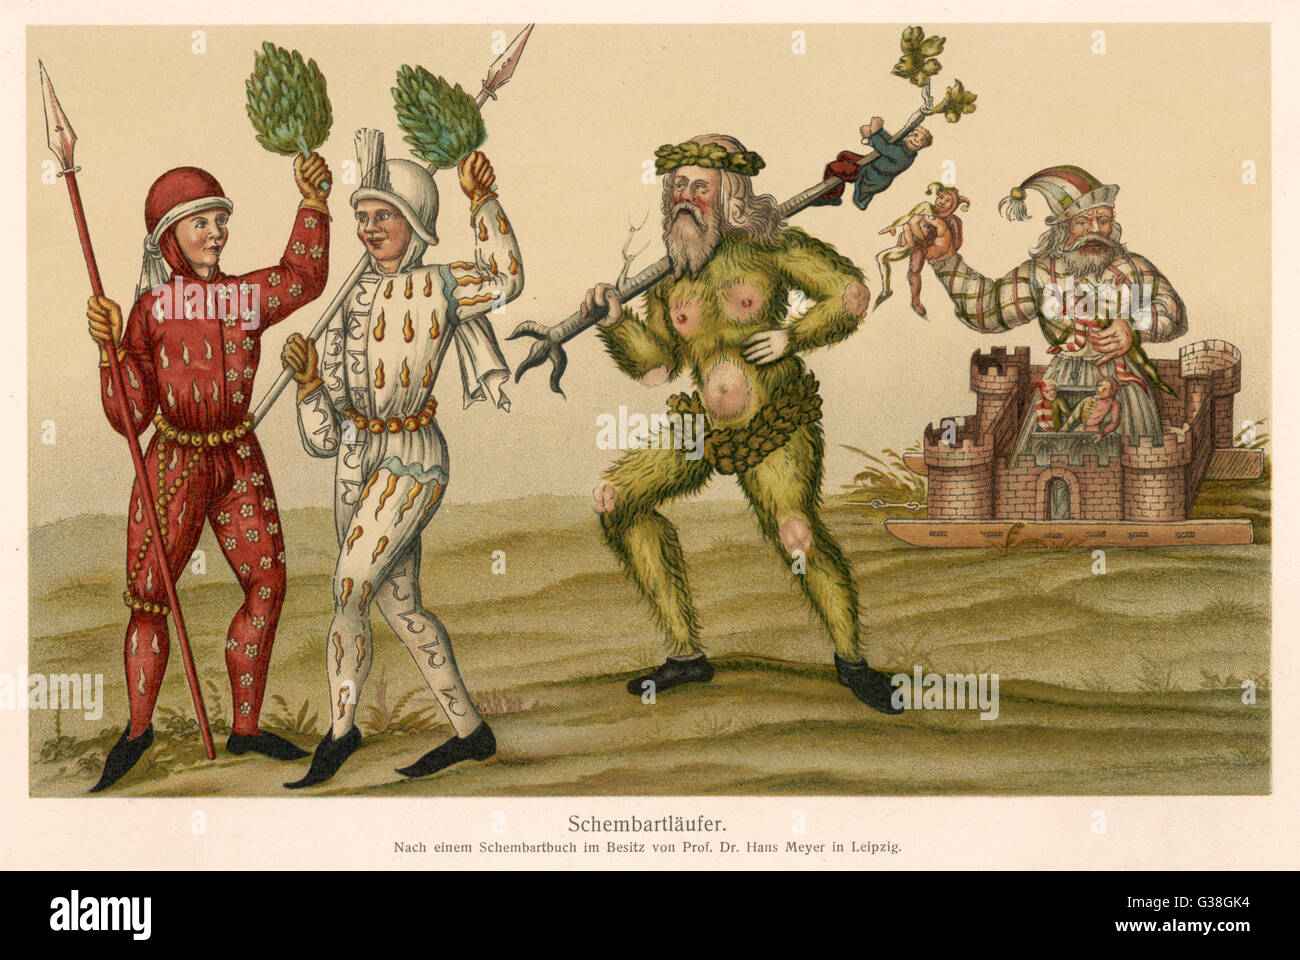 A 'Green Man' figures among  the characters of a medieval  German morality play        Date: medieval Stock Photo